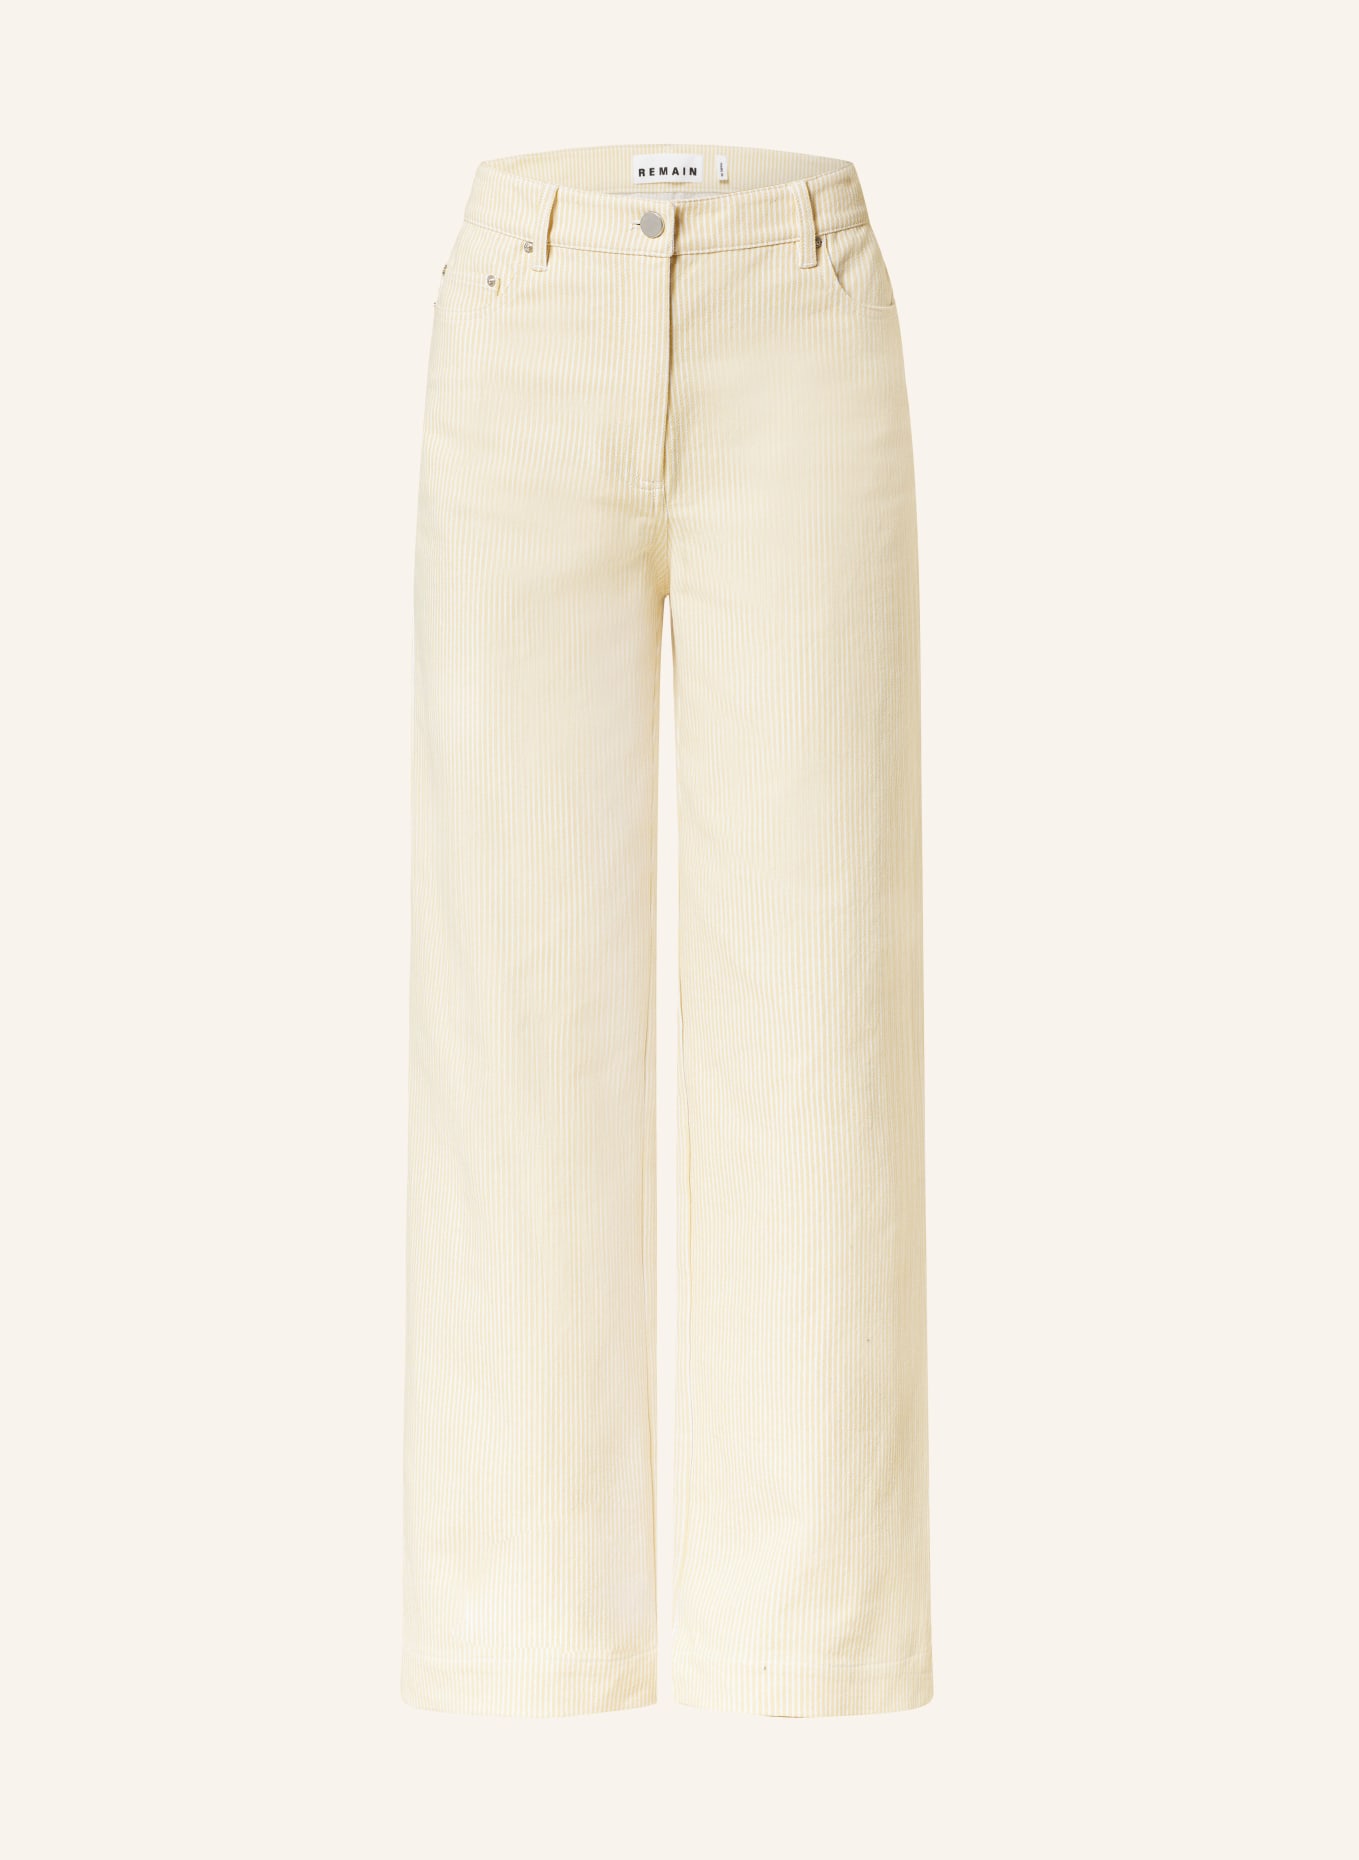 REMAIN Wide leg trousers, Color: YELLOW/ WHITE (Image 1)